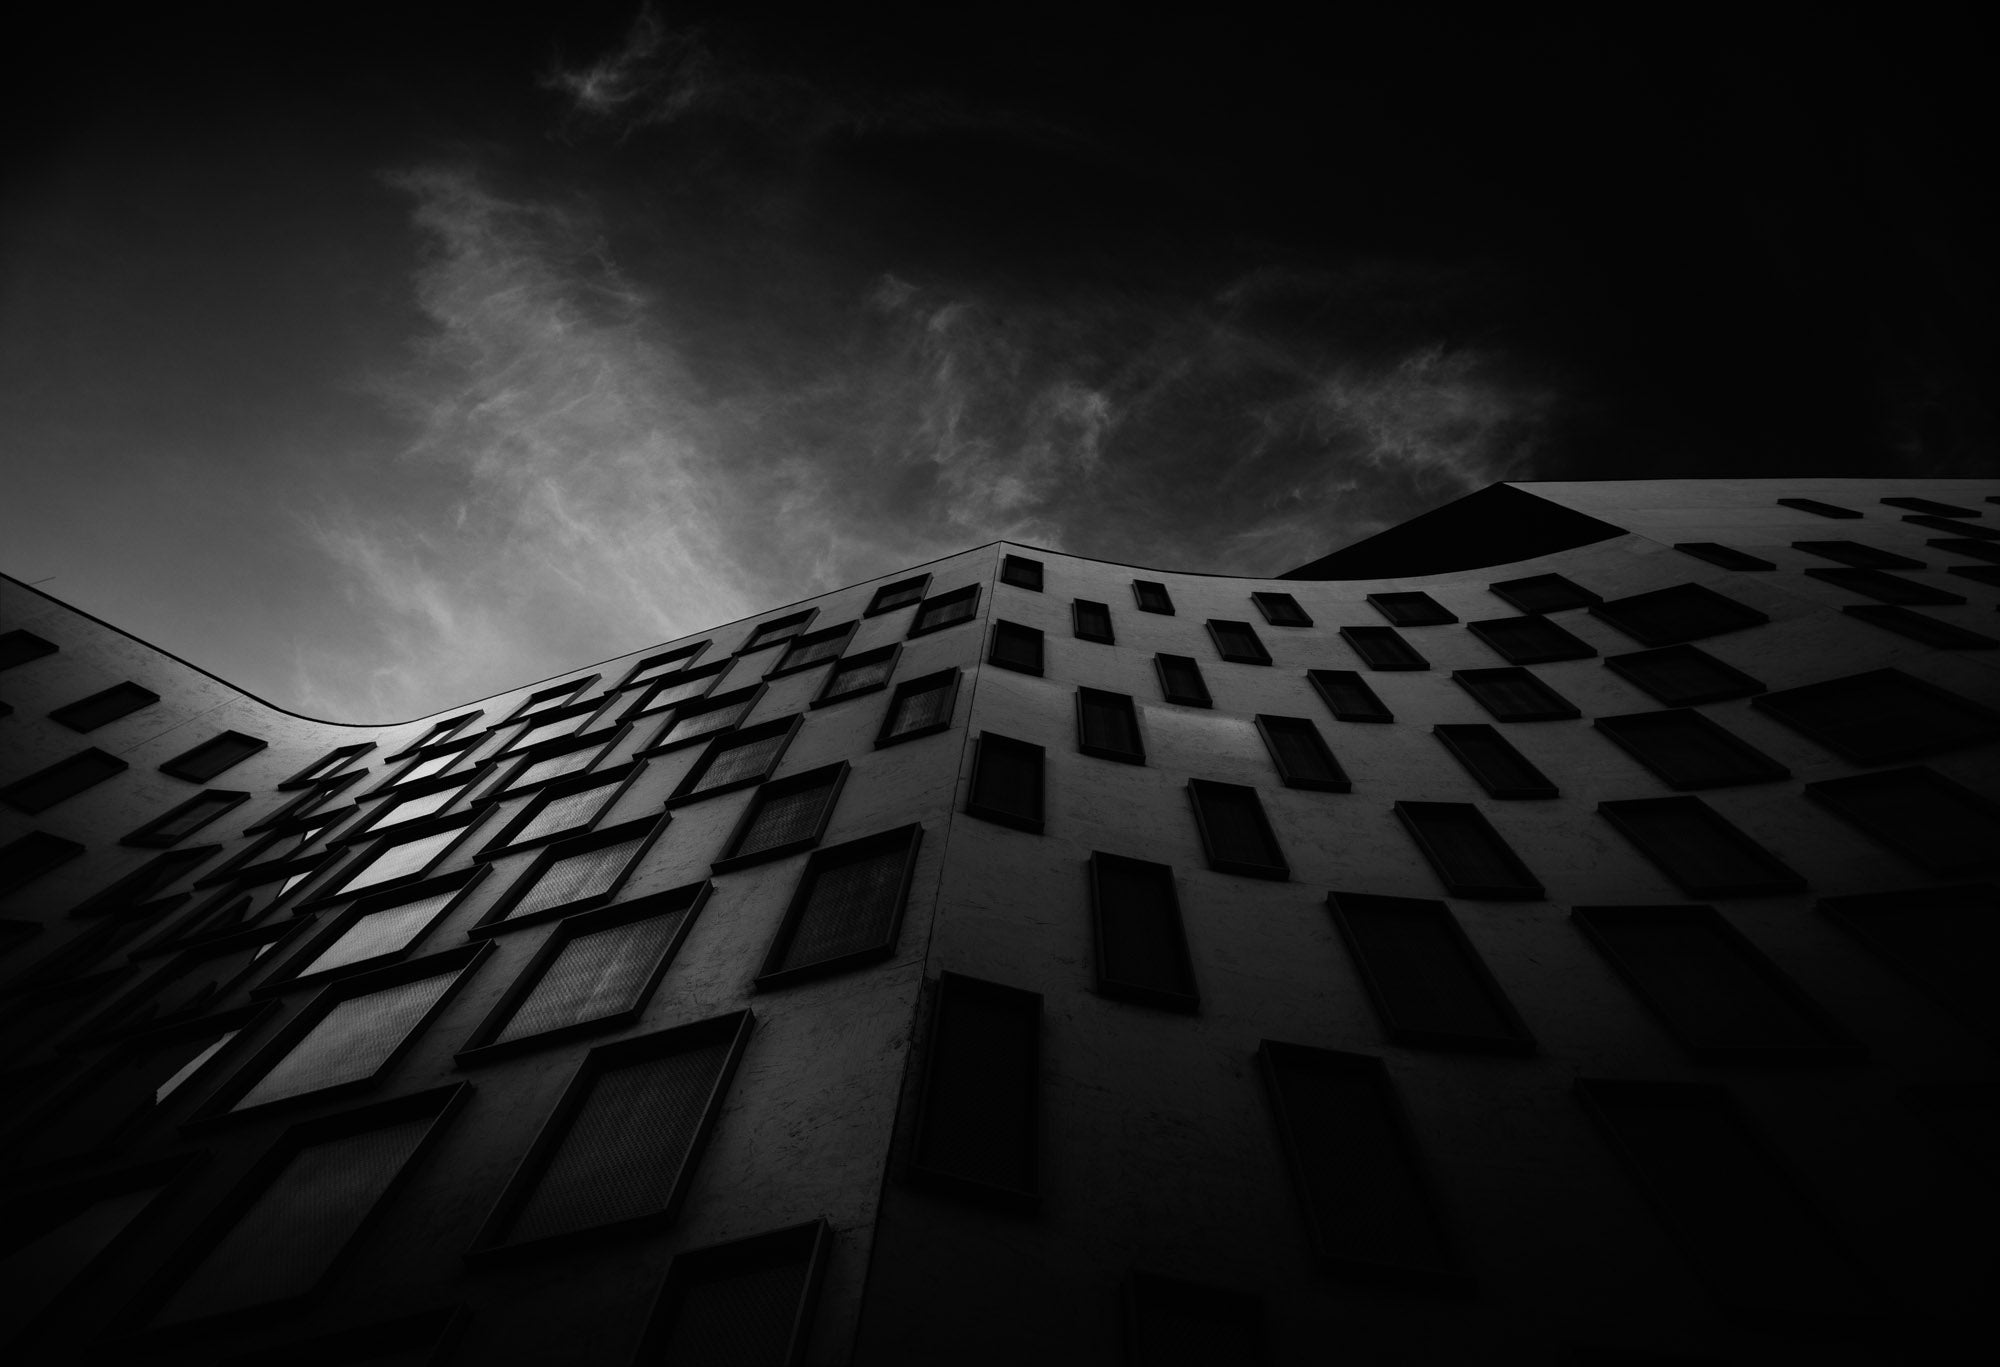 Silhouetted against the sky, the curved facade of the Vicki Sara Building at UTS, adorned with a pattern of dark windows.